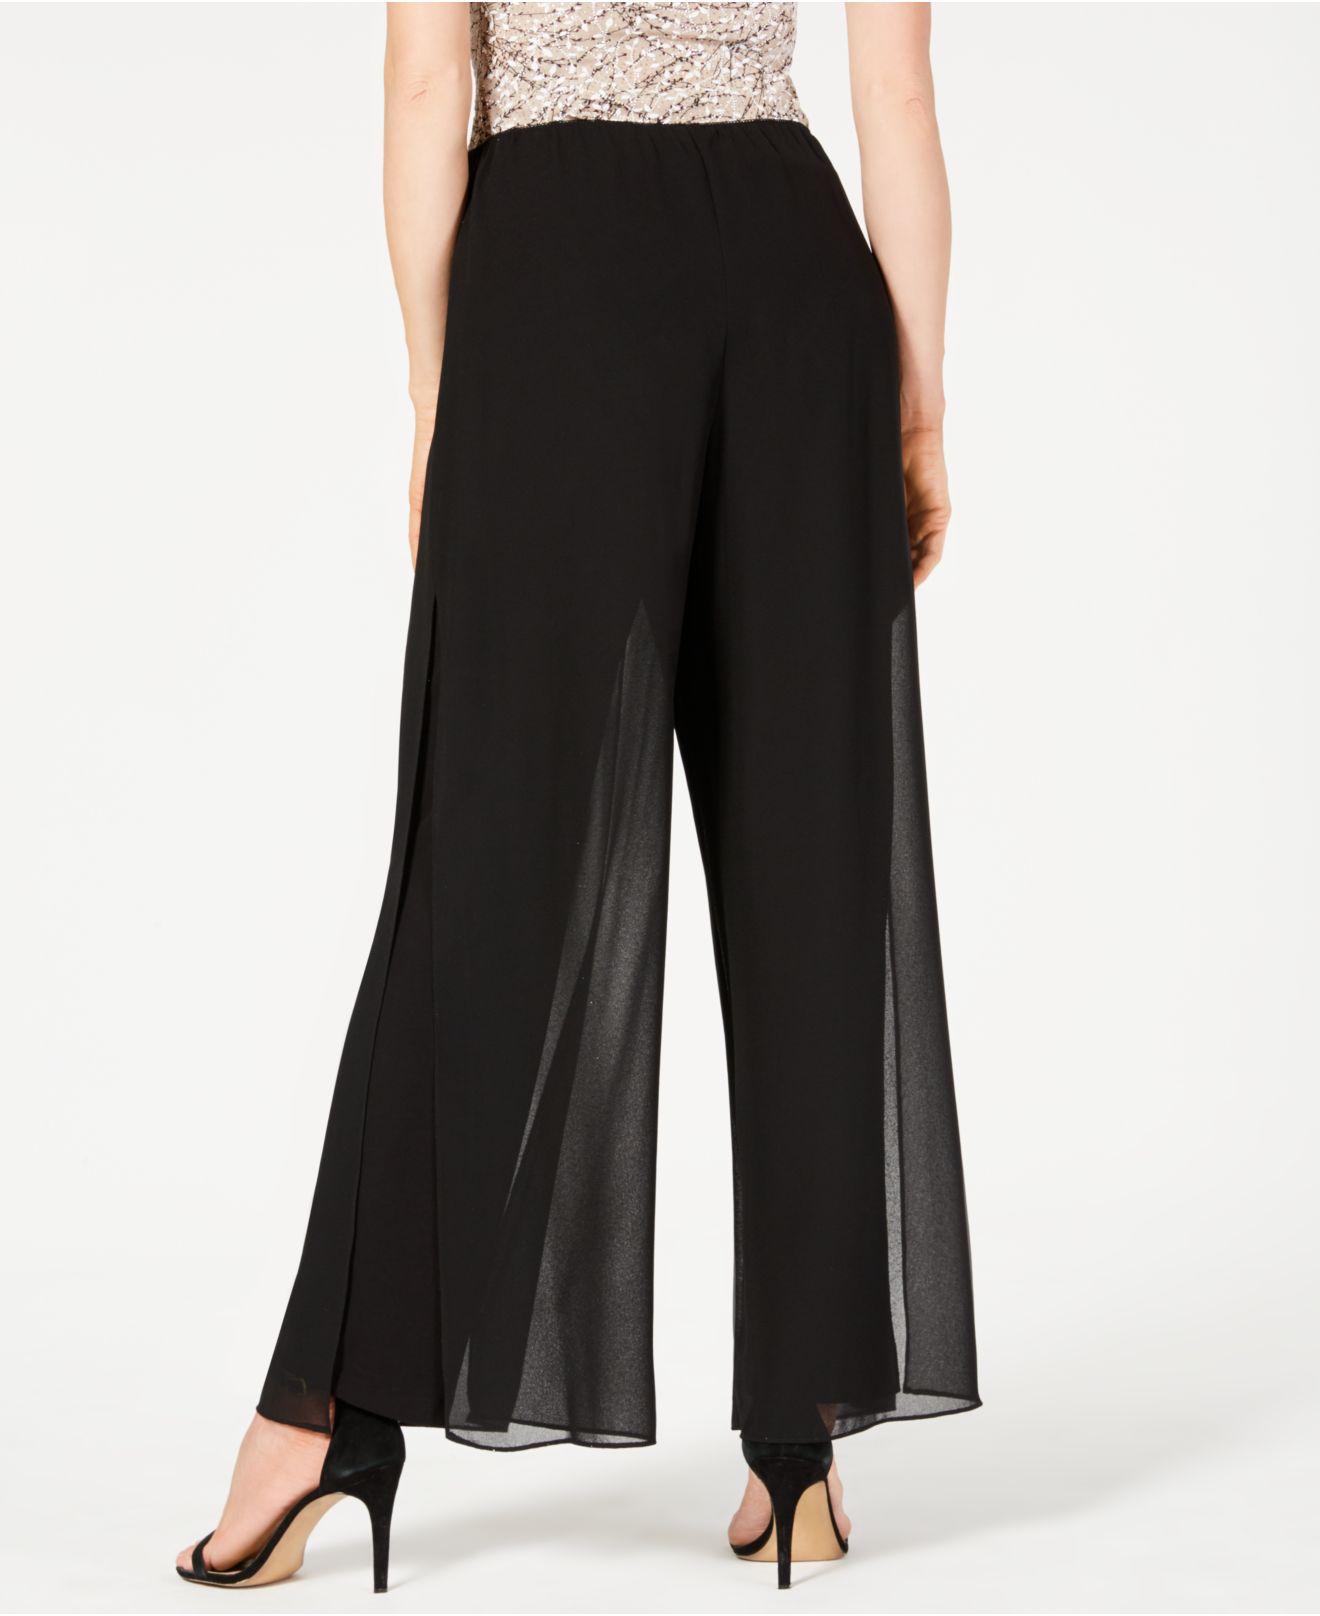 Alex Evenings Synthetic Petite Straight-leg Overlay Pants in Black - Lyst